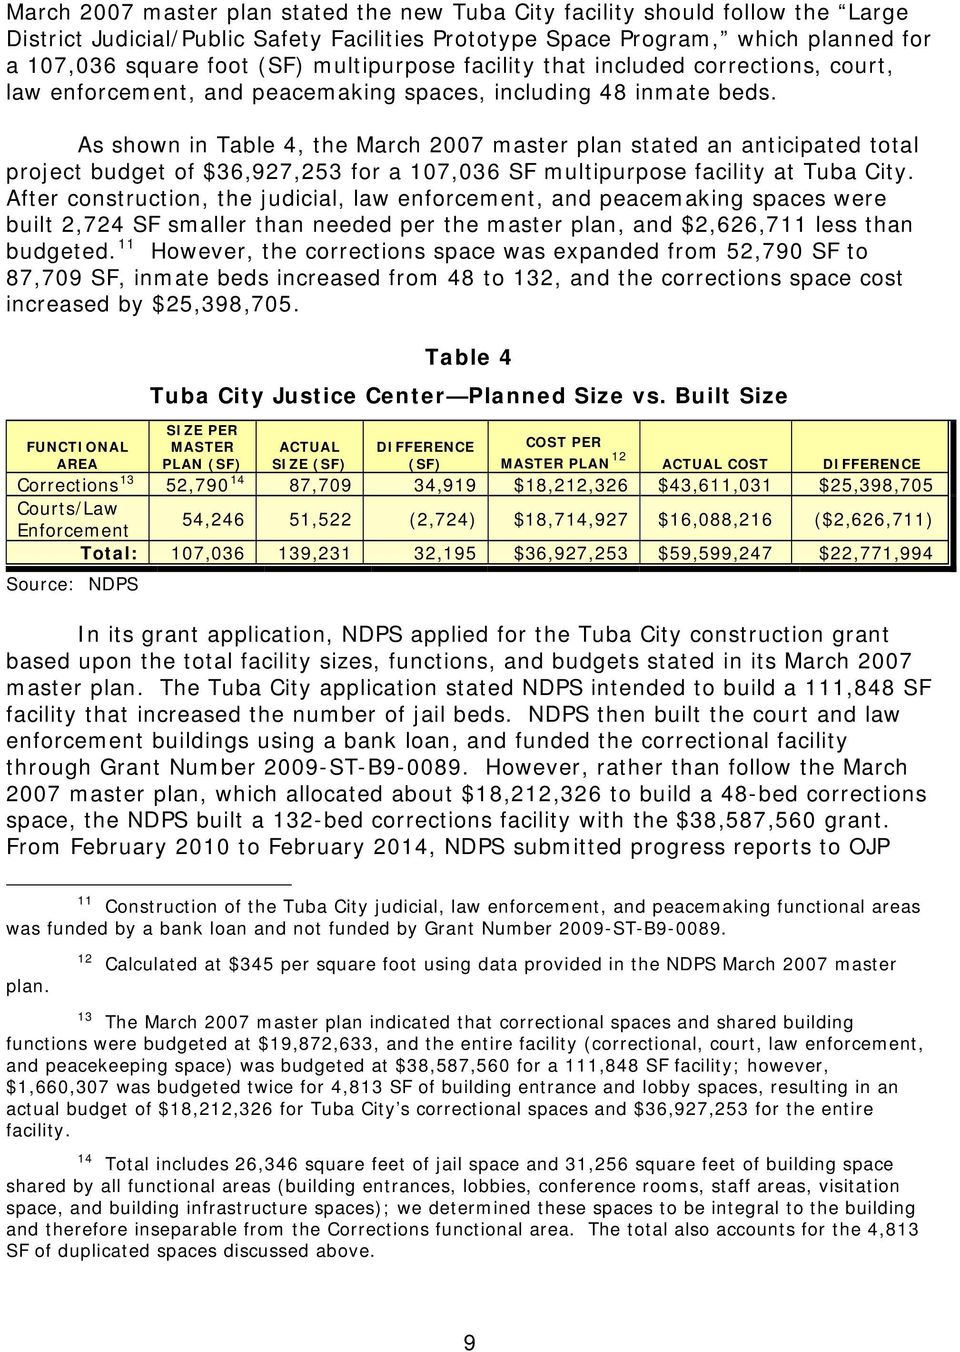 As shown in Table 4, the March 2007 master plan stated an anticipated total project budget of $36,927,253 for a 107,036 SF multipurpose facility at Tuba City.